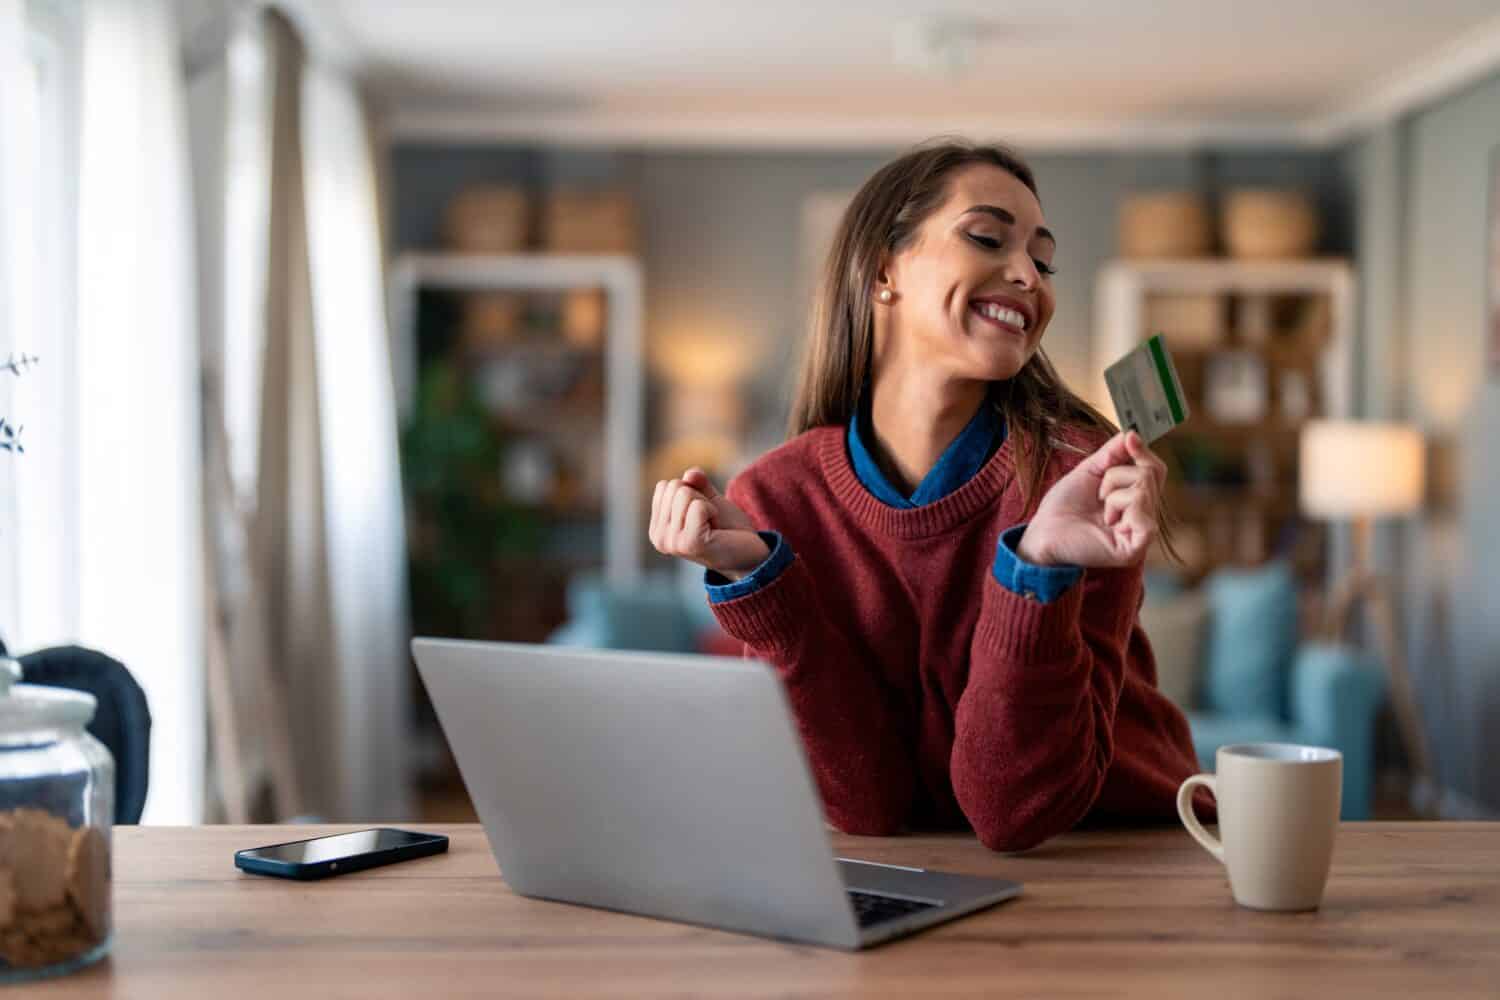 Cheerful female customer looking at credit card and pumping fist after receiving reward for online shopping.